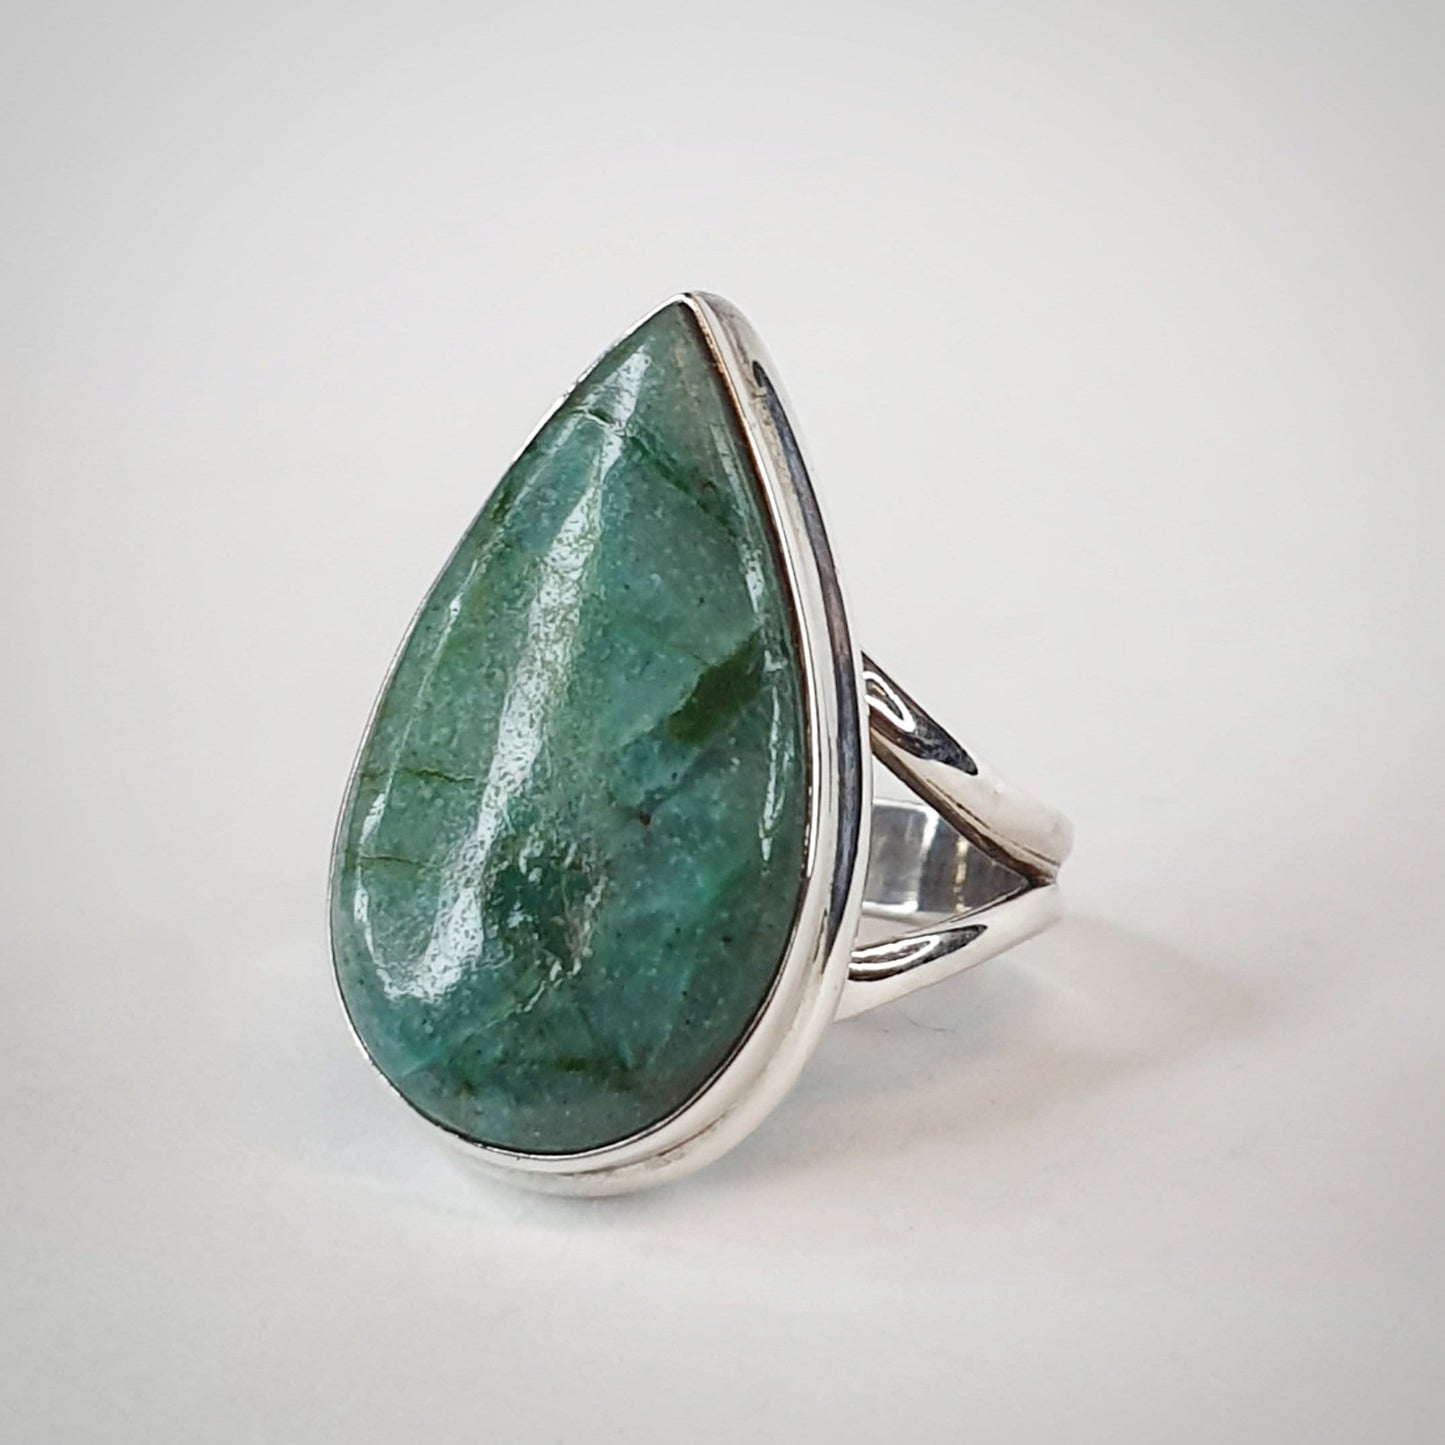 Chrysocolla Ring - Size 6.5  - ON SALE